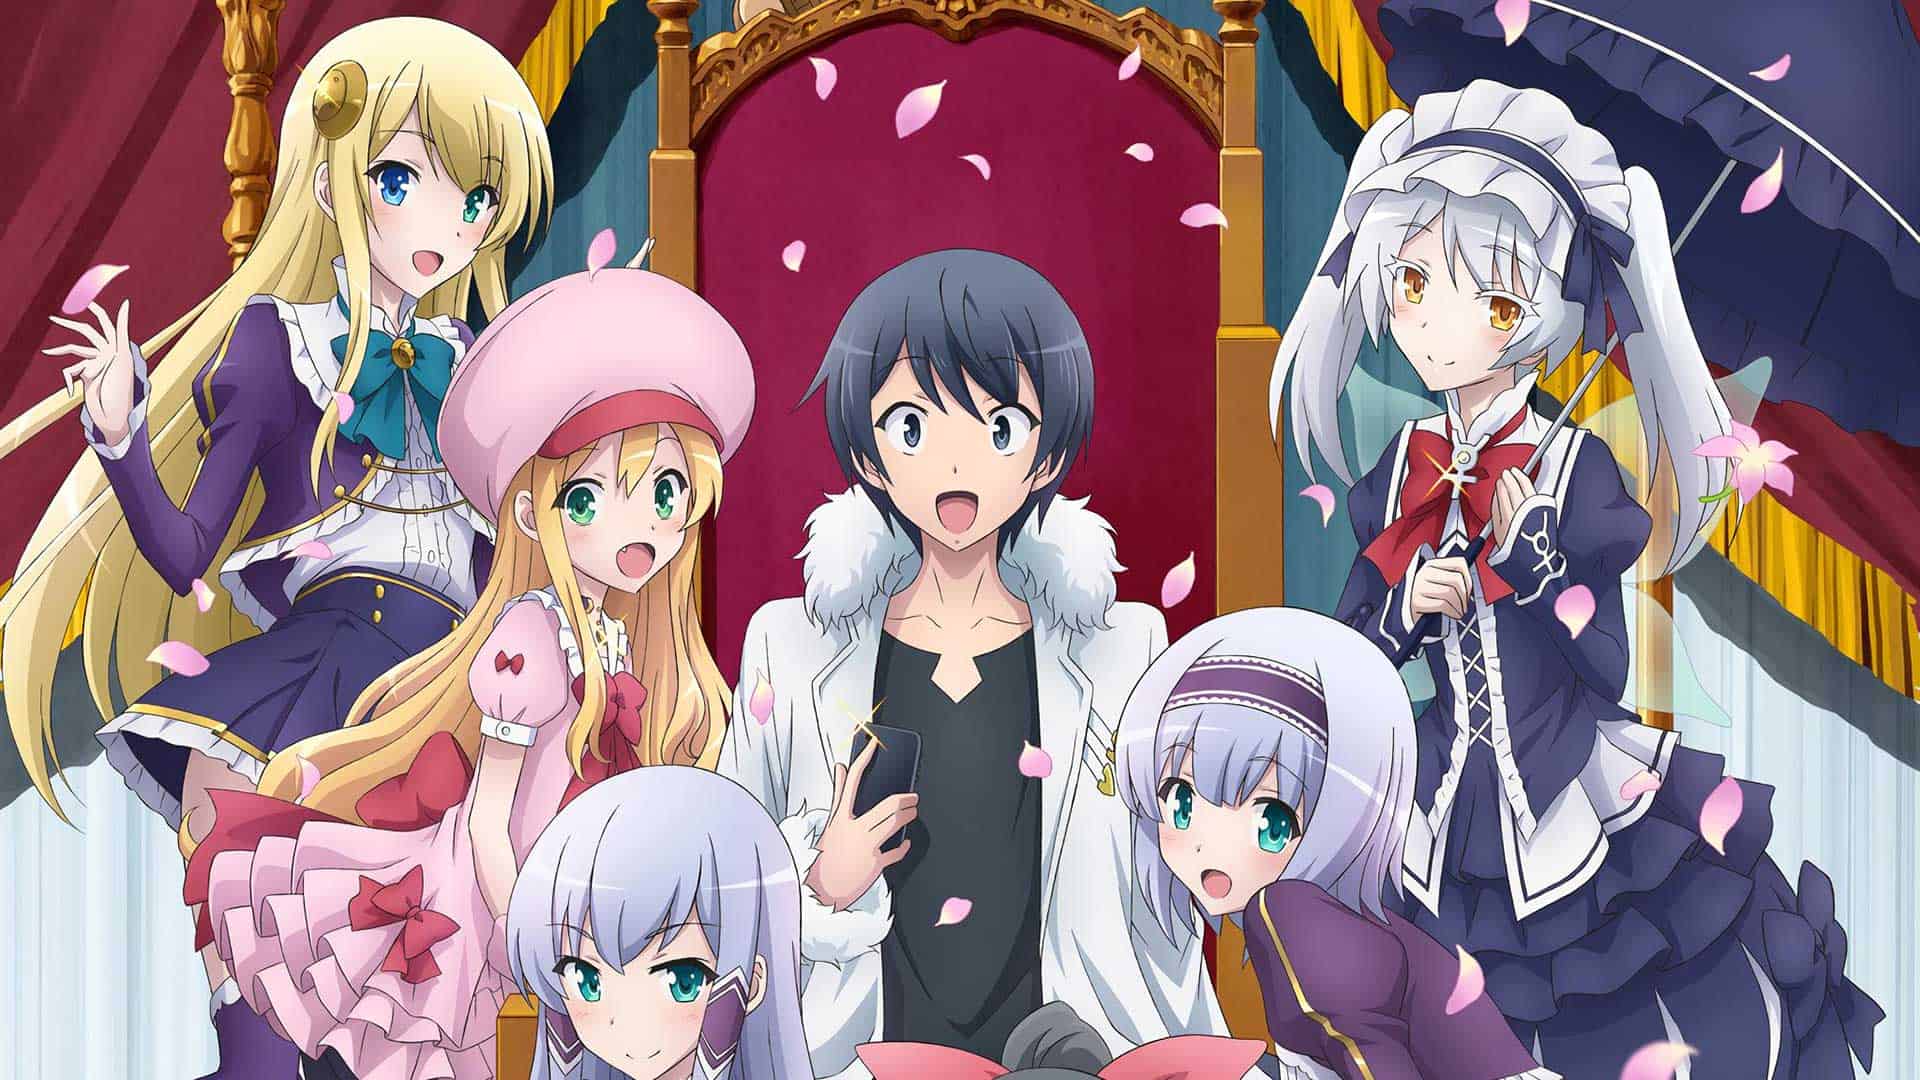 How To Watch In Another World With My Smartphone Season 2 Episodes? Streaming Guide